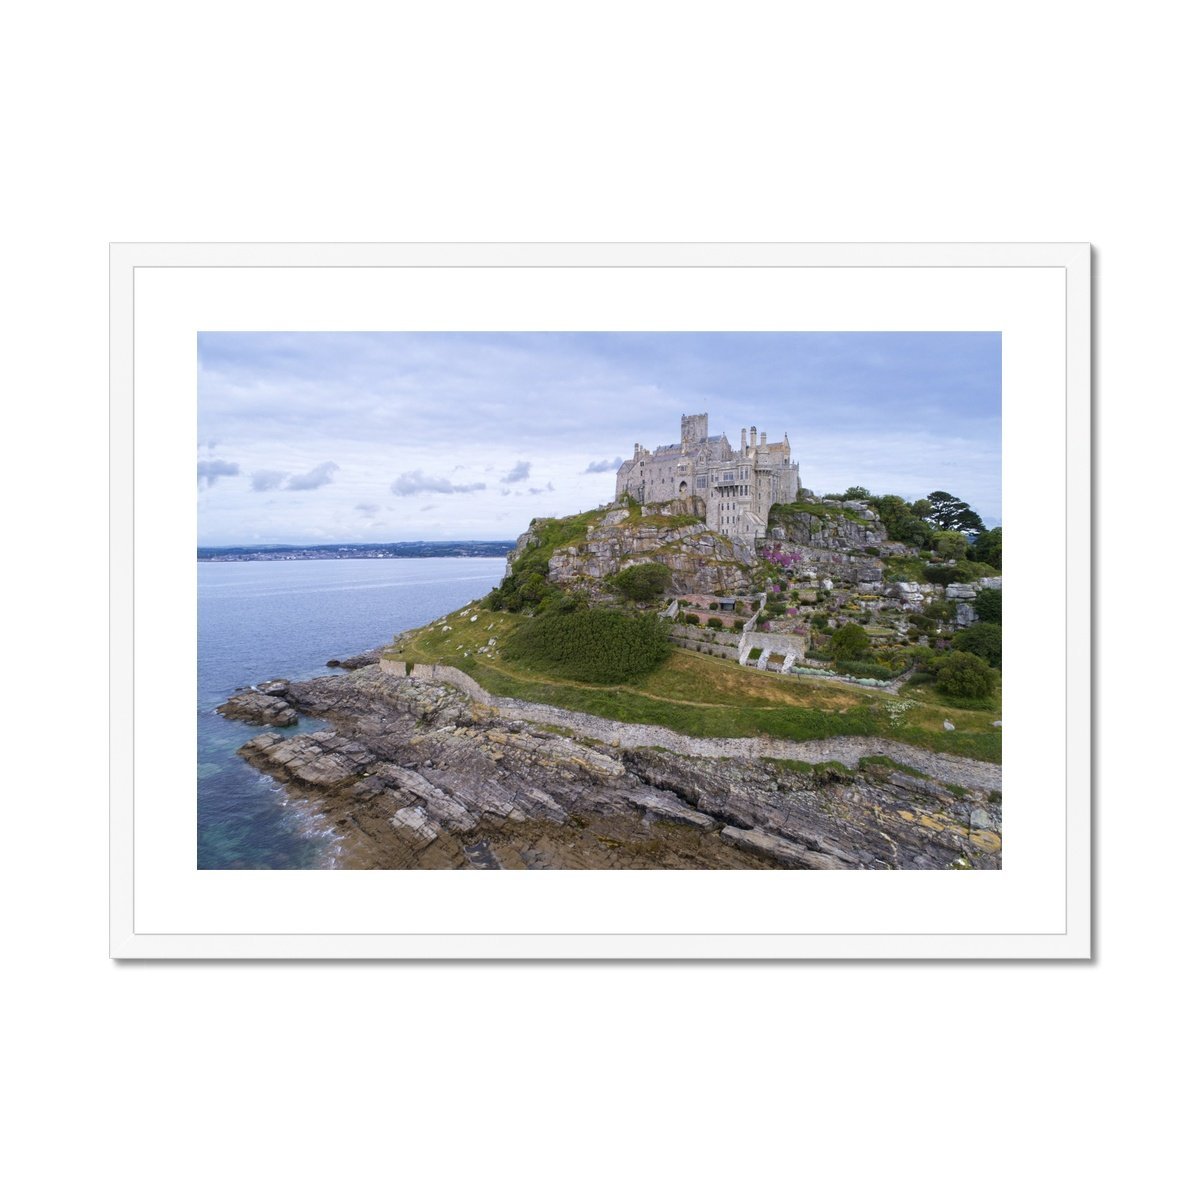 st michaels mount close up white frame